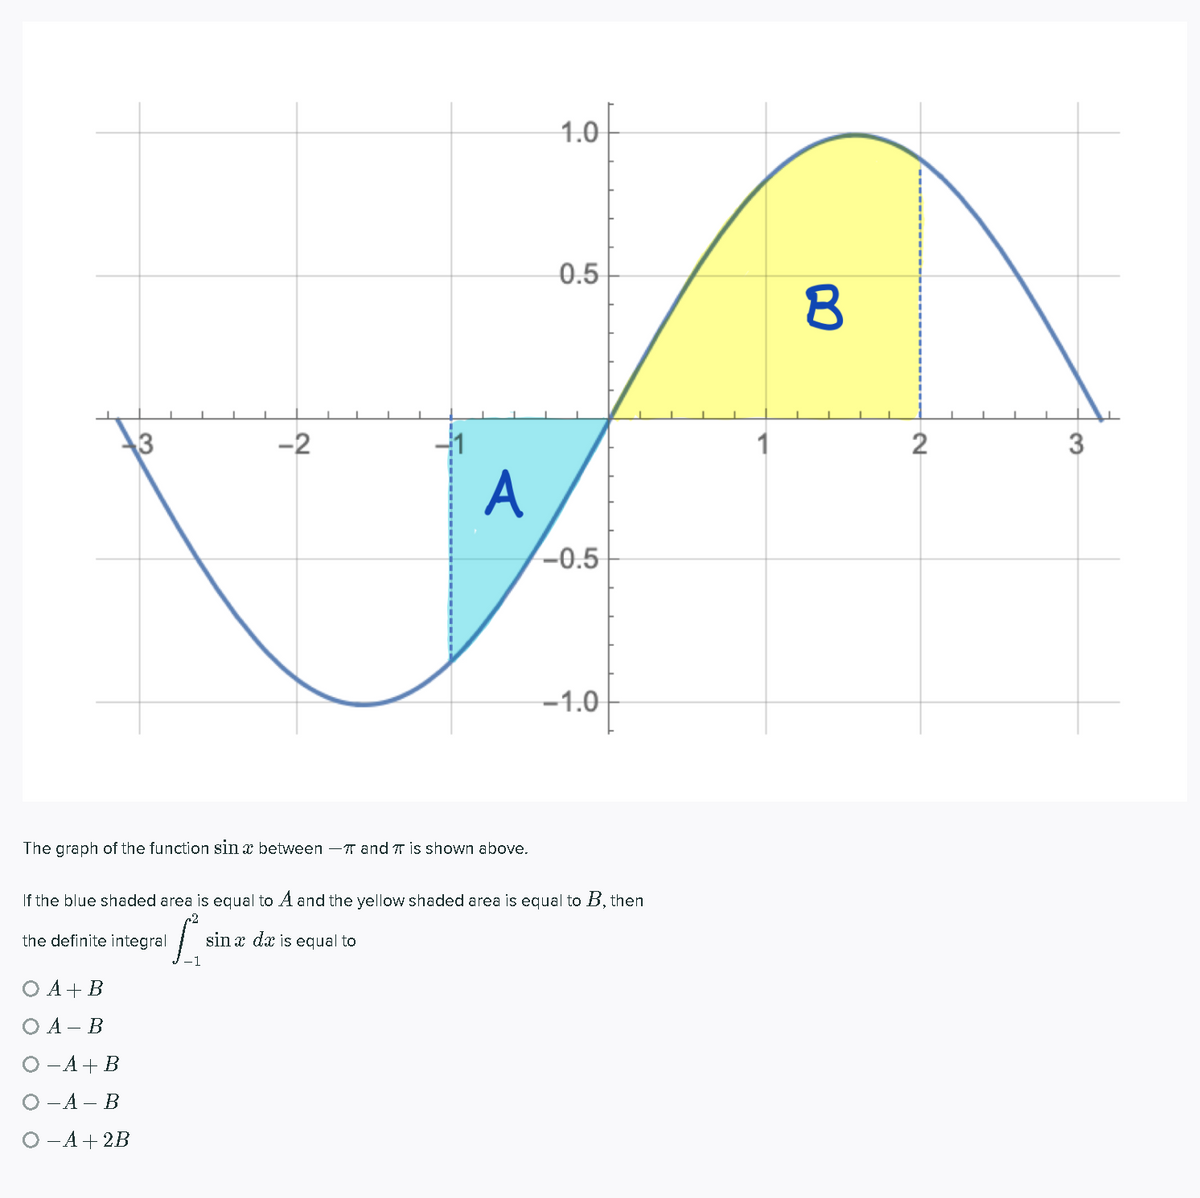 1.0
0.5
13
-2
2
A
-0.5
-1.0
The graph of the function sin x between -T and T is shown above.
If the blue shaded area is equal to A and the yellow shaded area is equal to B, then
+2
the definite integral
sin x dæ is equal to
-1
O A+B
O A- B
O-A+ B
О -А — В
О -А+ 2B
